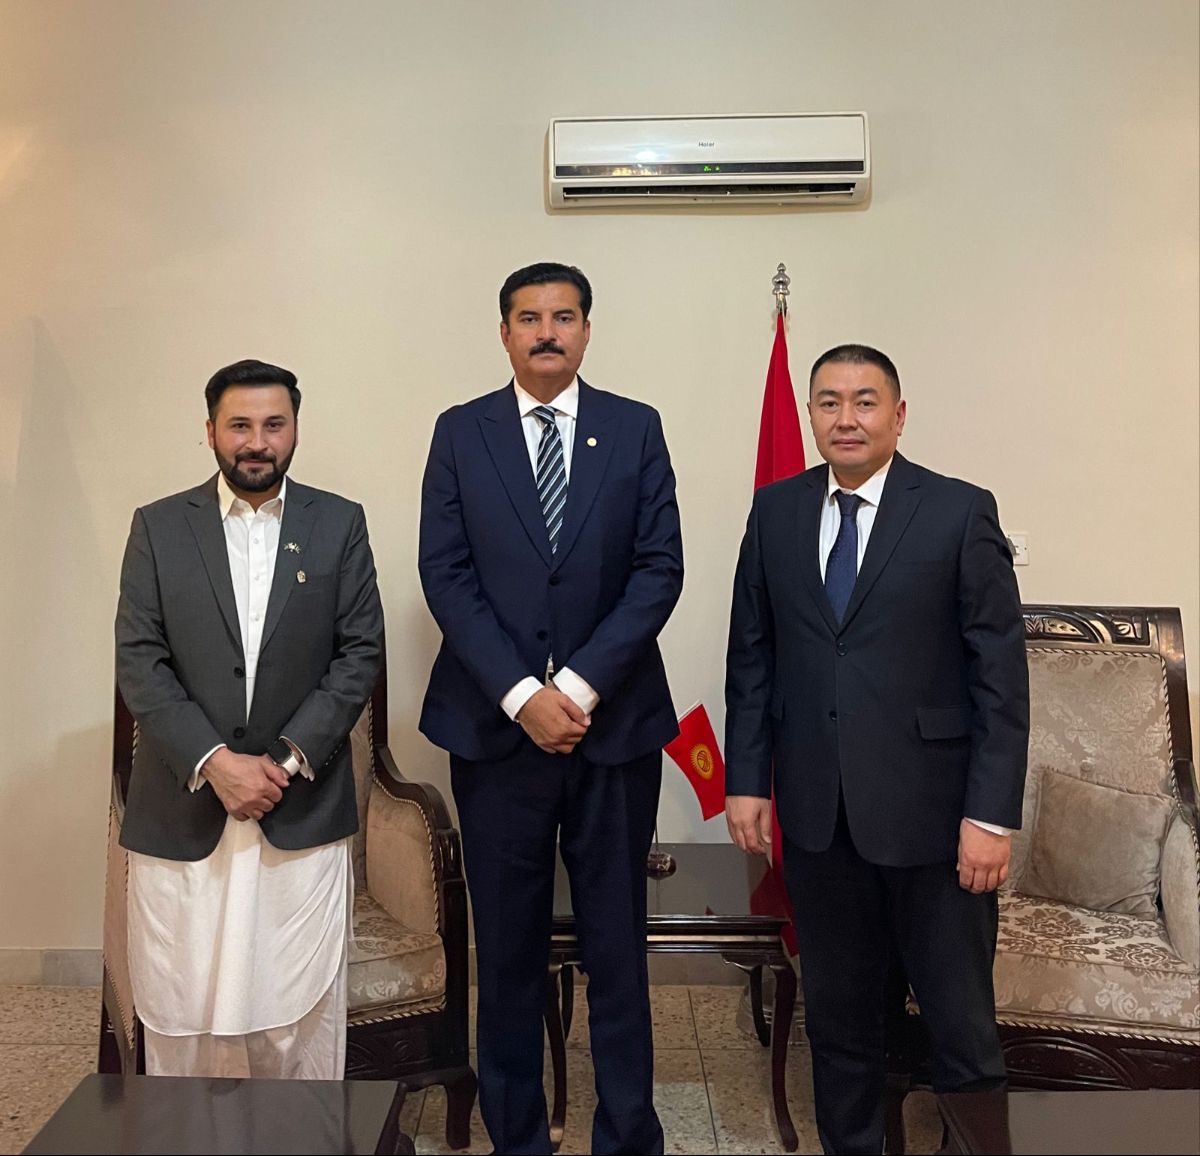 The Ambassador Extraordinary and Plenipotentiary of the Kyrgyz Republic to the Islamic Republic of Pakistan H.E. Mr. Ulanbek Totuiaev met with the Central Secretary Information of the Pakistan Peoples Party Mr. Faisal Karim Kundi.